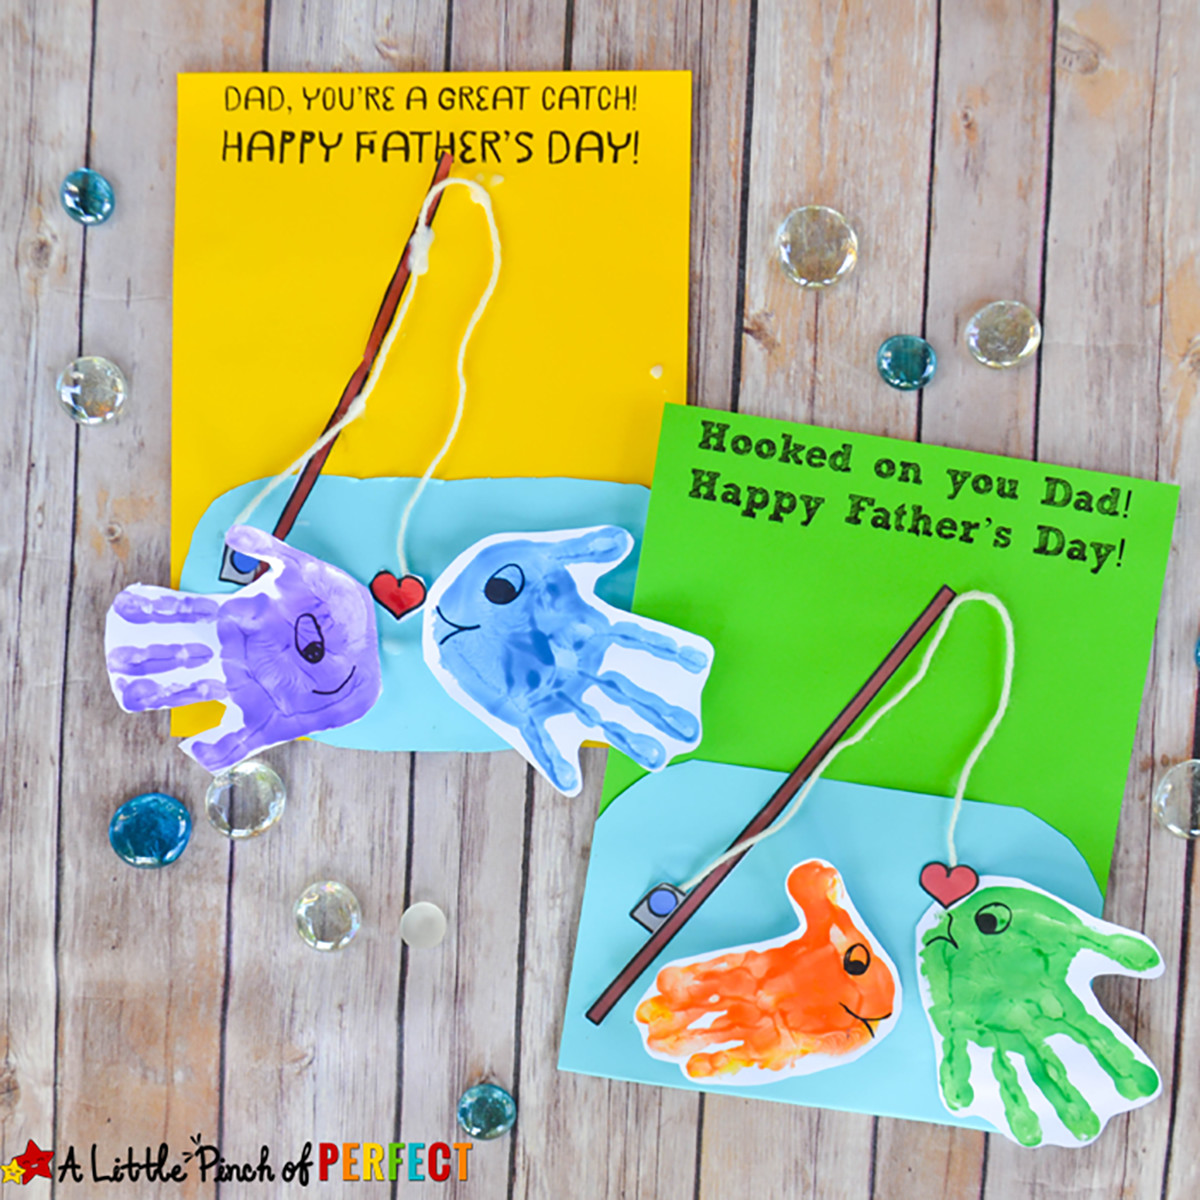 Preschool Fathers Day Craft
 DIY Preschool Father s Day Gifts Your Little es Will